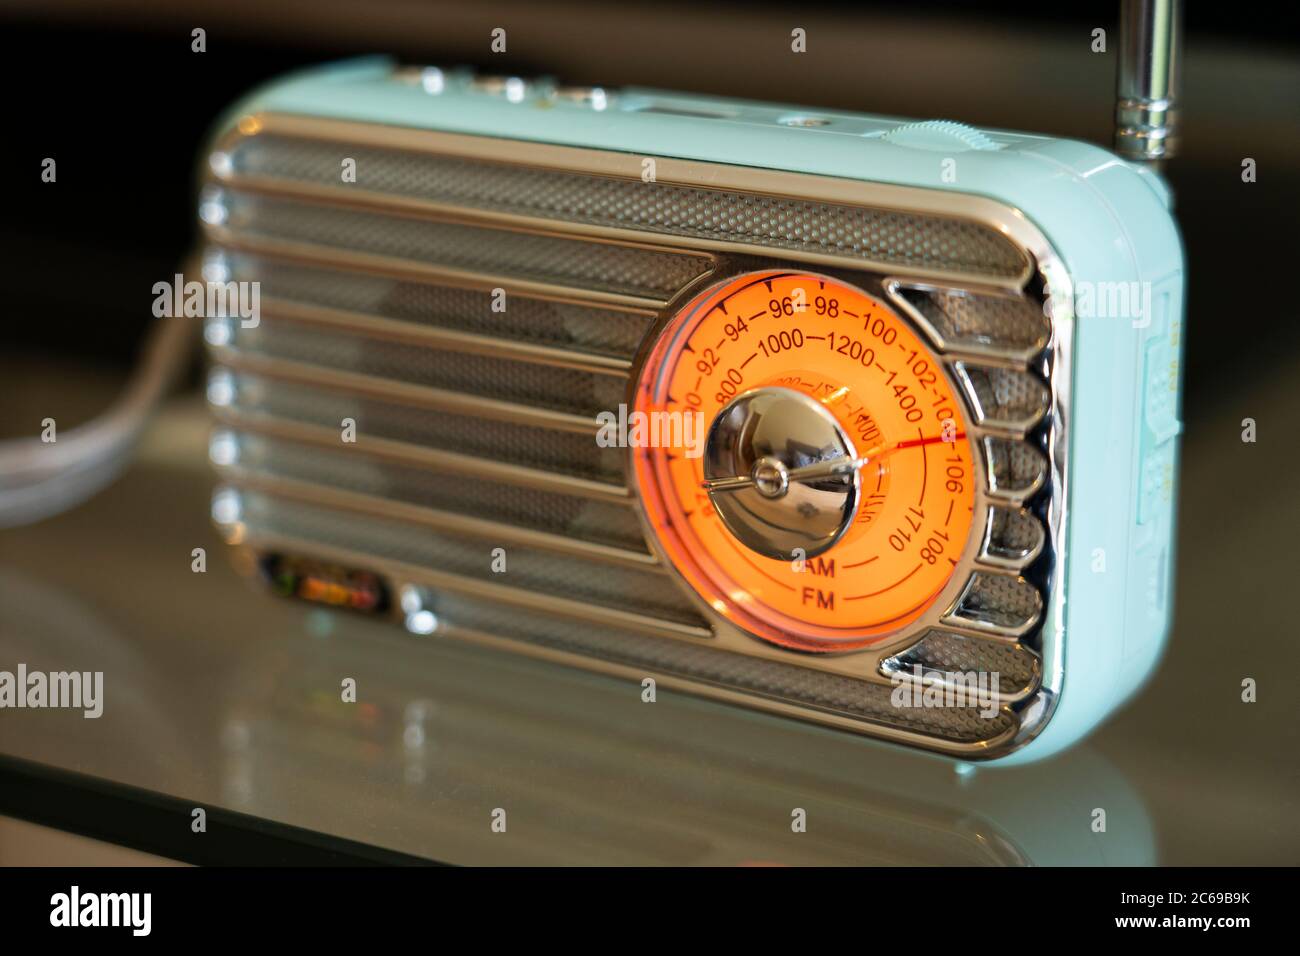 A blue portable pocket retro bluetooth radio with an illuminated orange FM / AM dial in a household lounge, UK Stock Photo